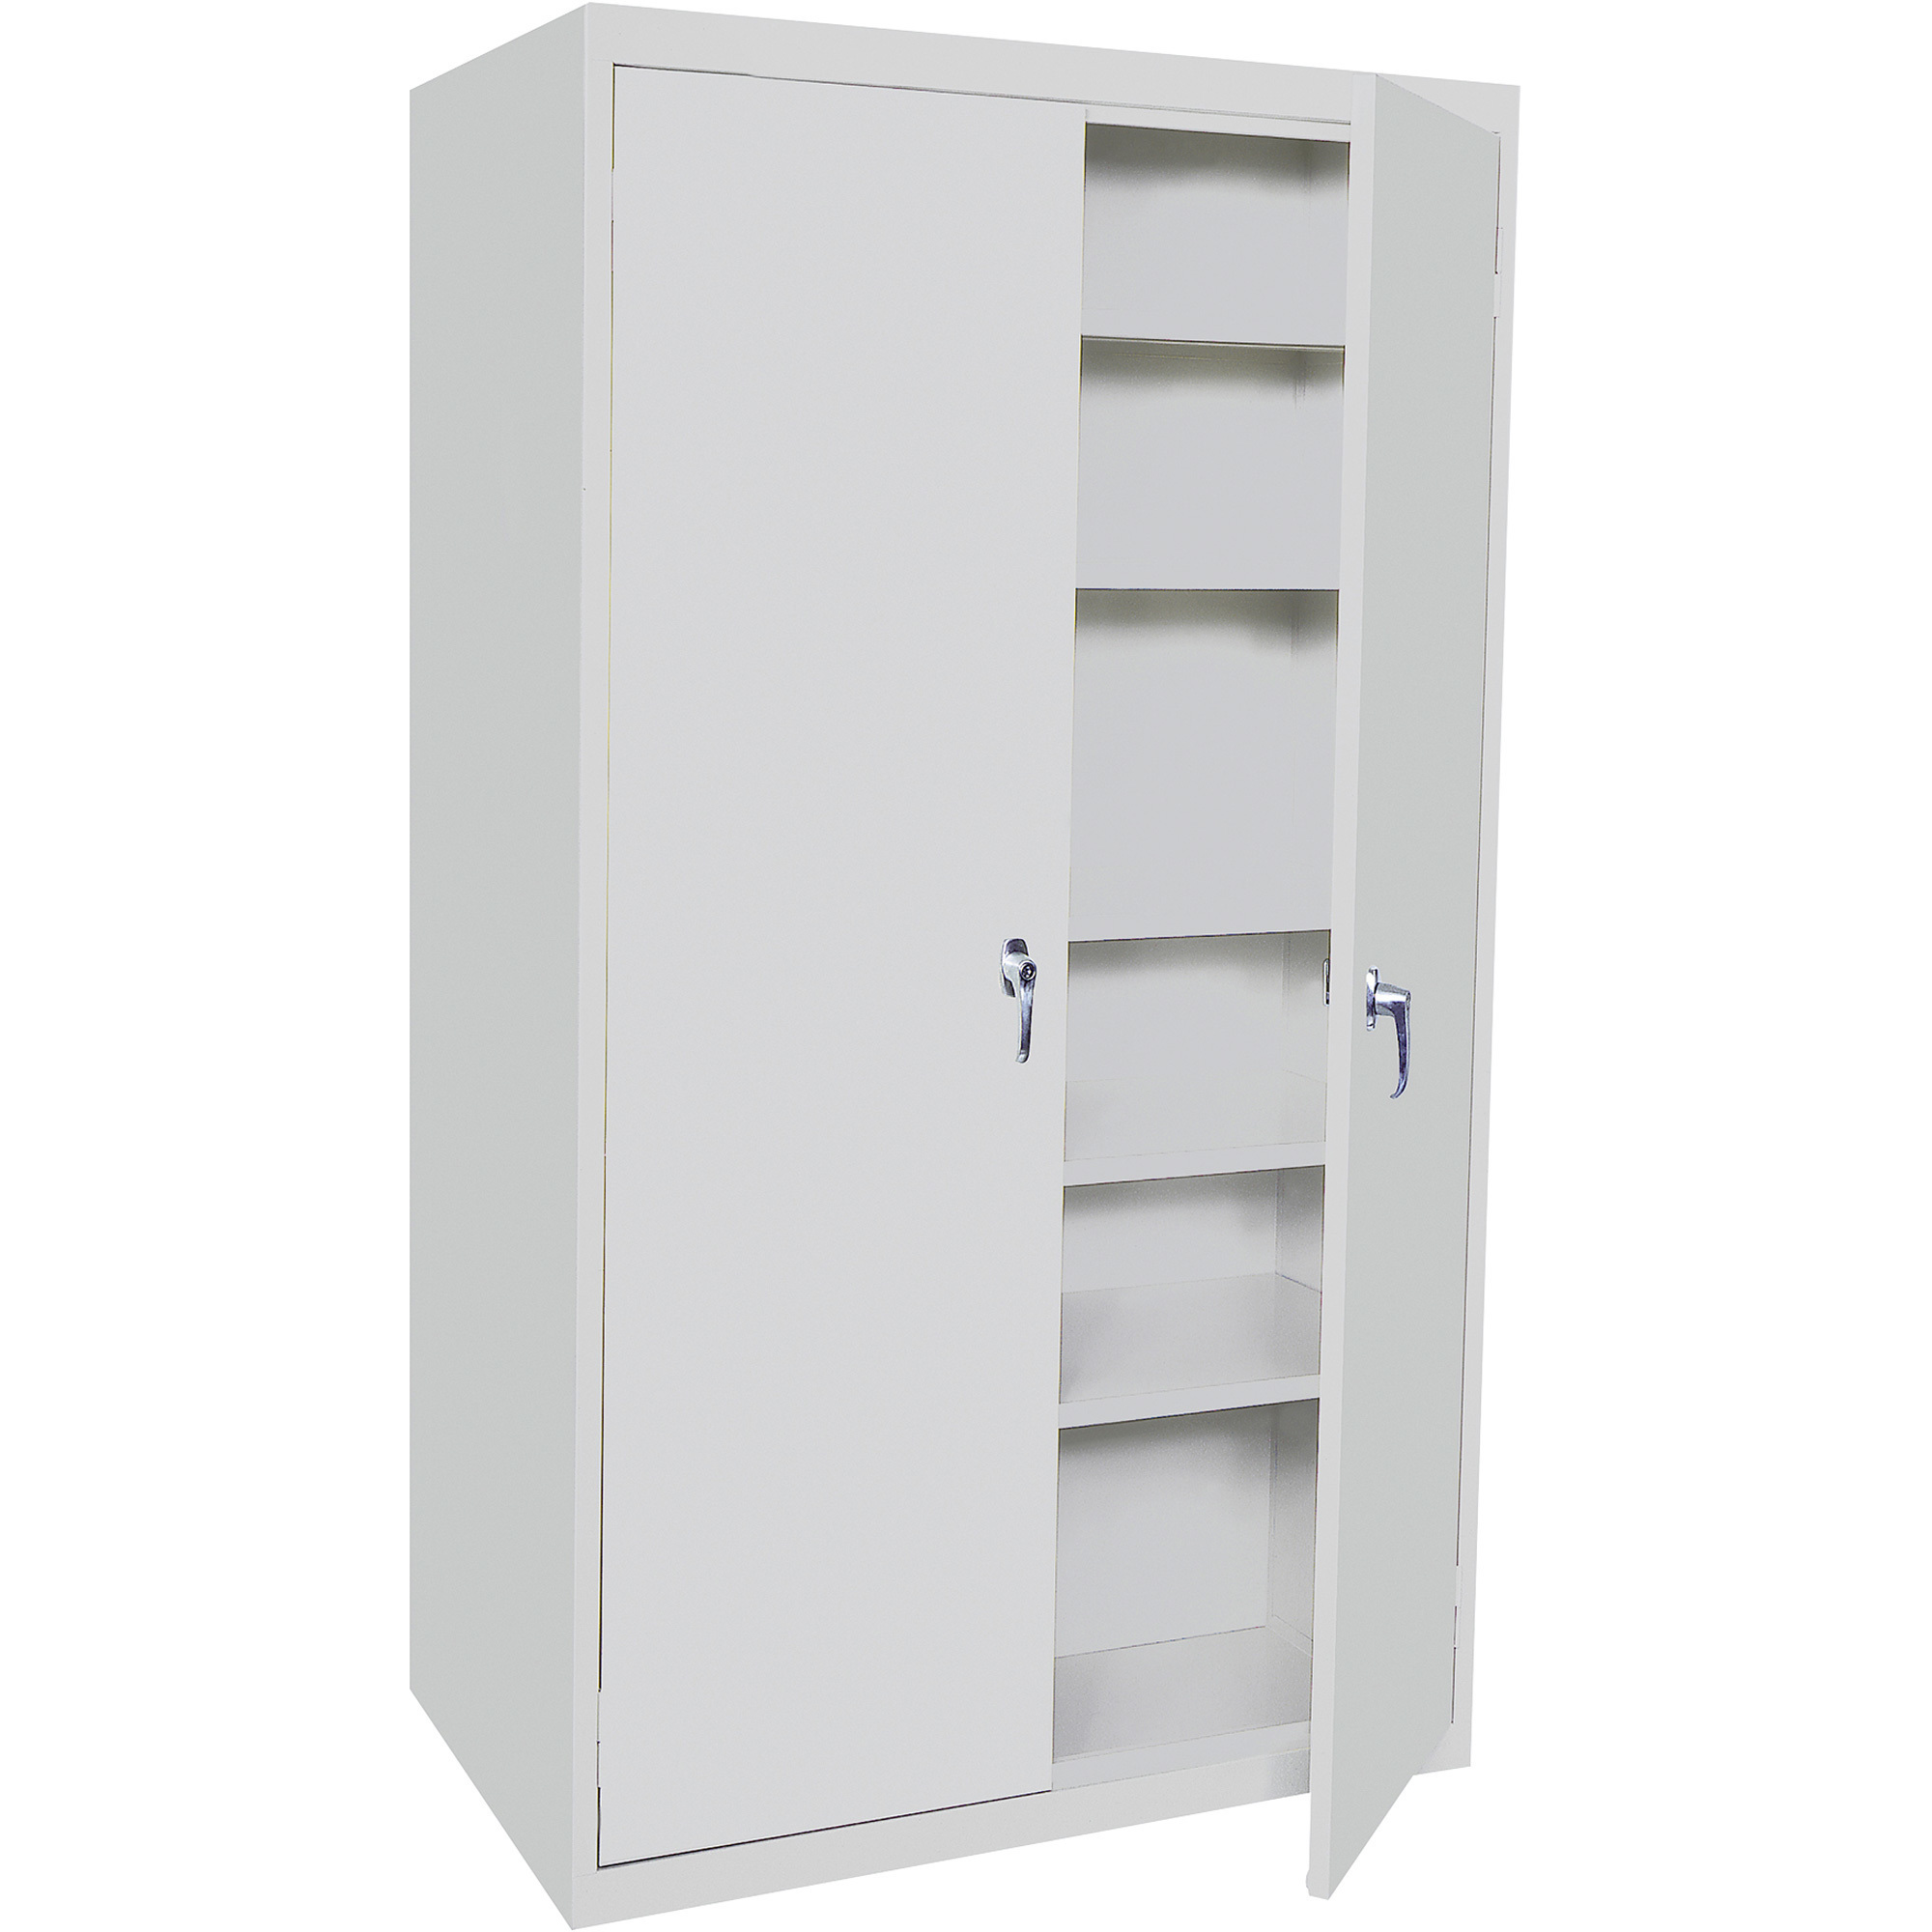 Storage Cabinet — Gray, 5 Fixed Shelves, 36Inch W x 18Inch D x 78Inch H, Model - Steel Cabinets USA 5-7818-FS-G